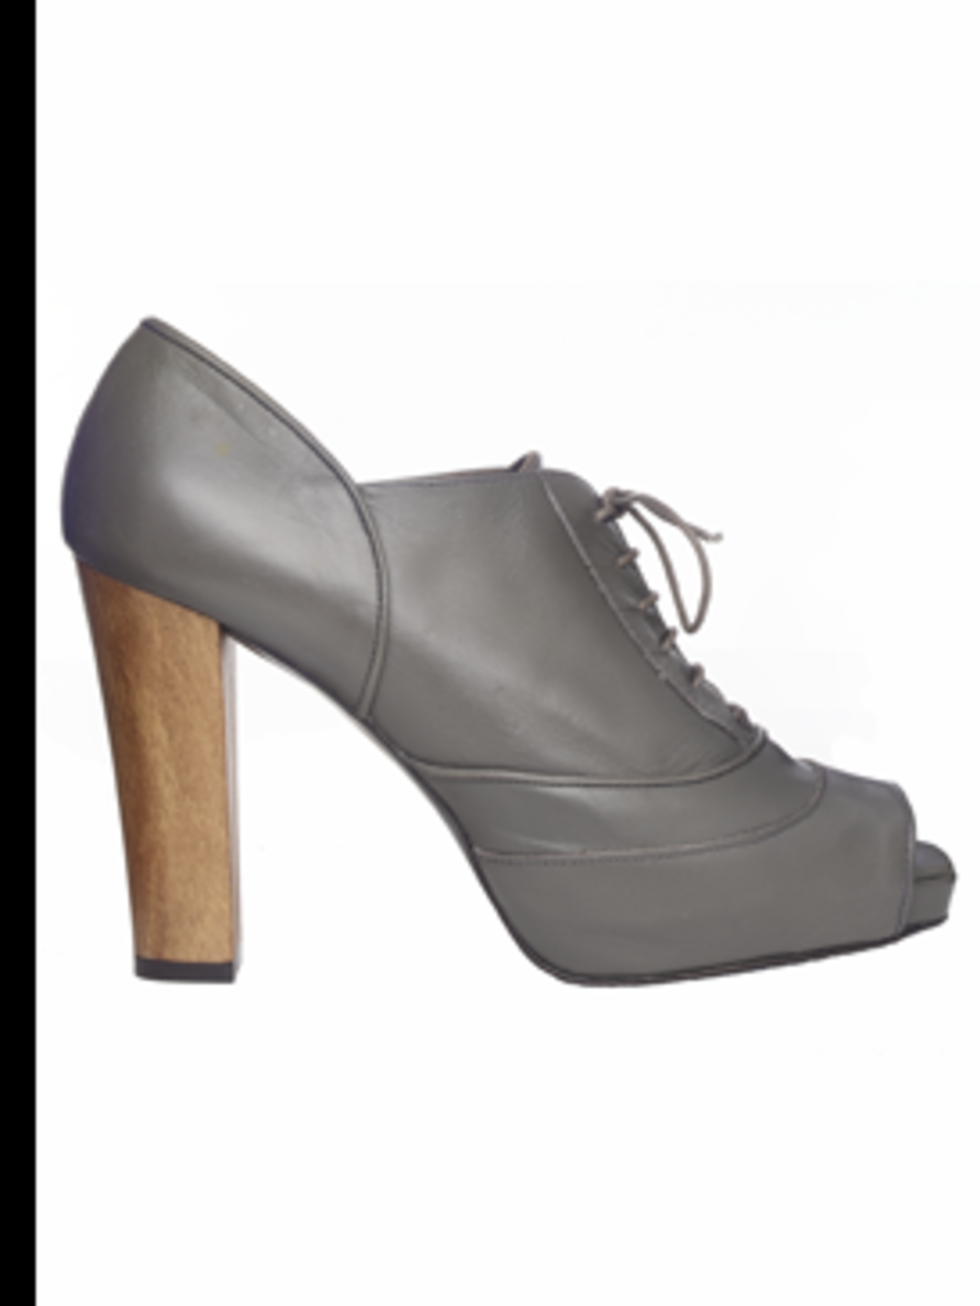 <p>Grey peep-toe with wooden heel, £59 from Zara for stockists call 020 7534 9500</p>